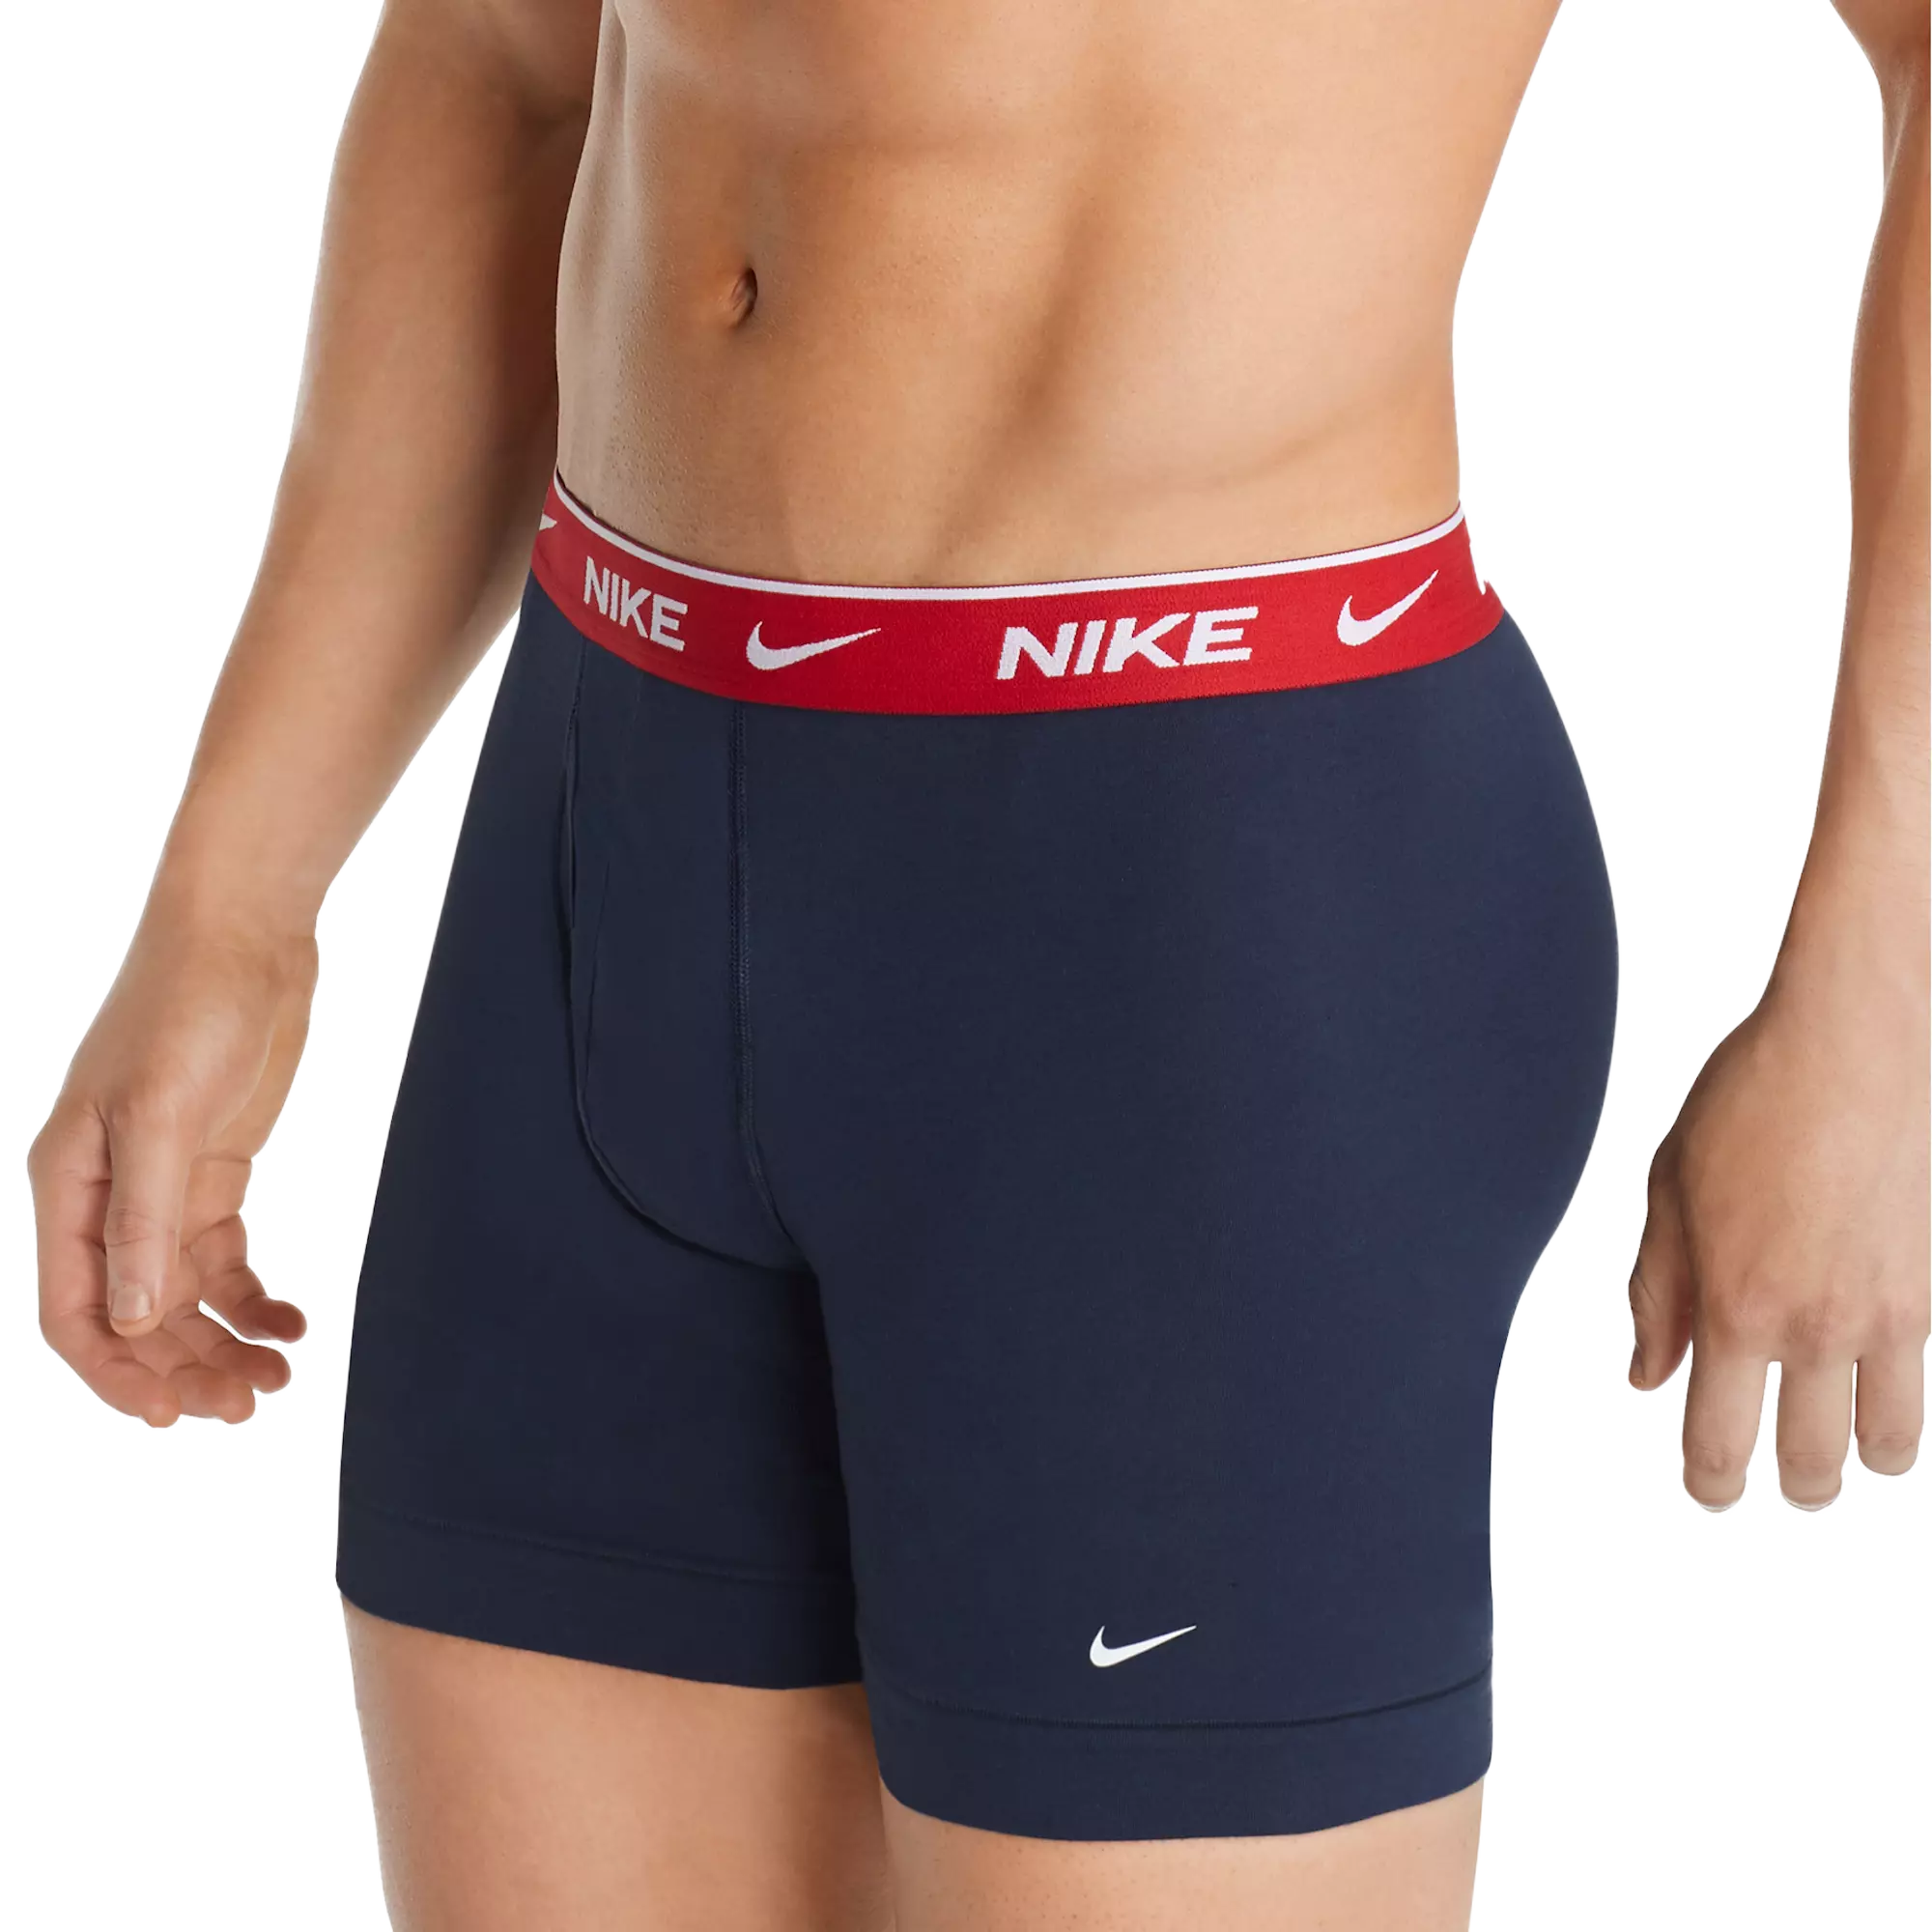 Nike Men's Dri-Fit Boxer Briefs - Stay Comfortable and Cool